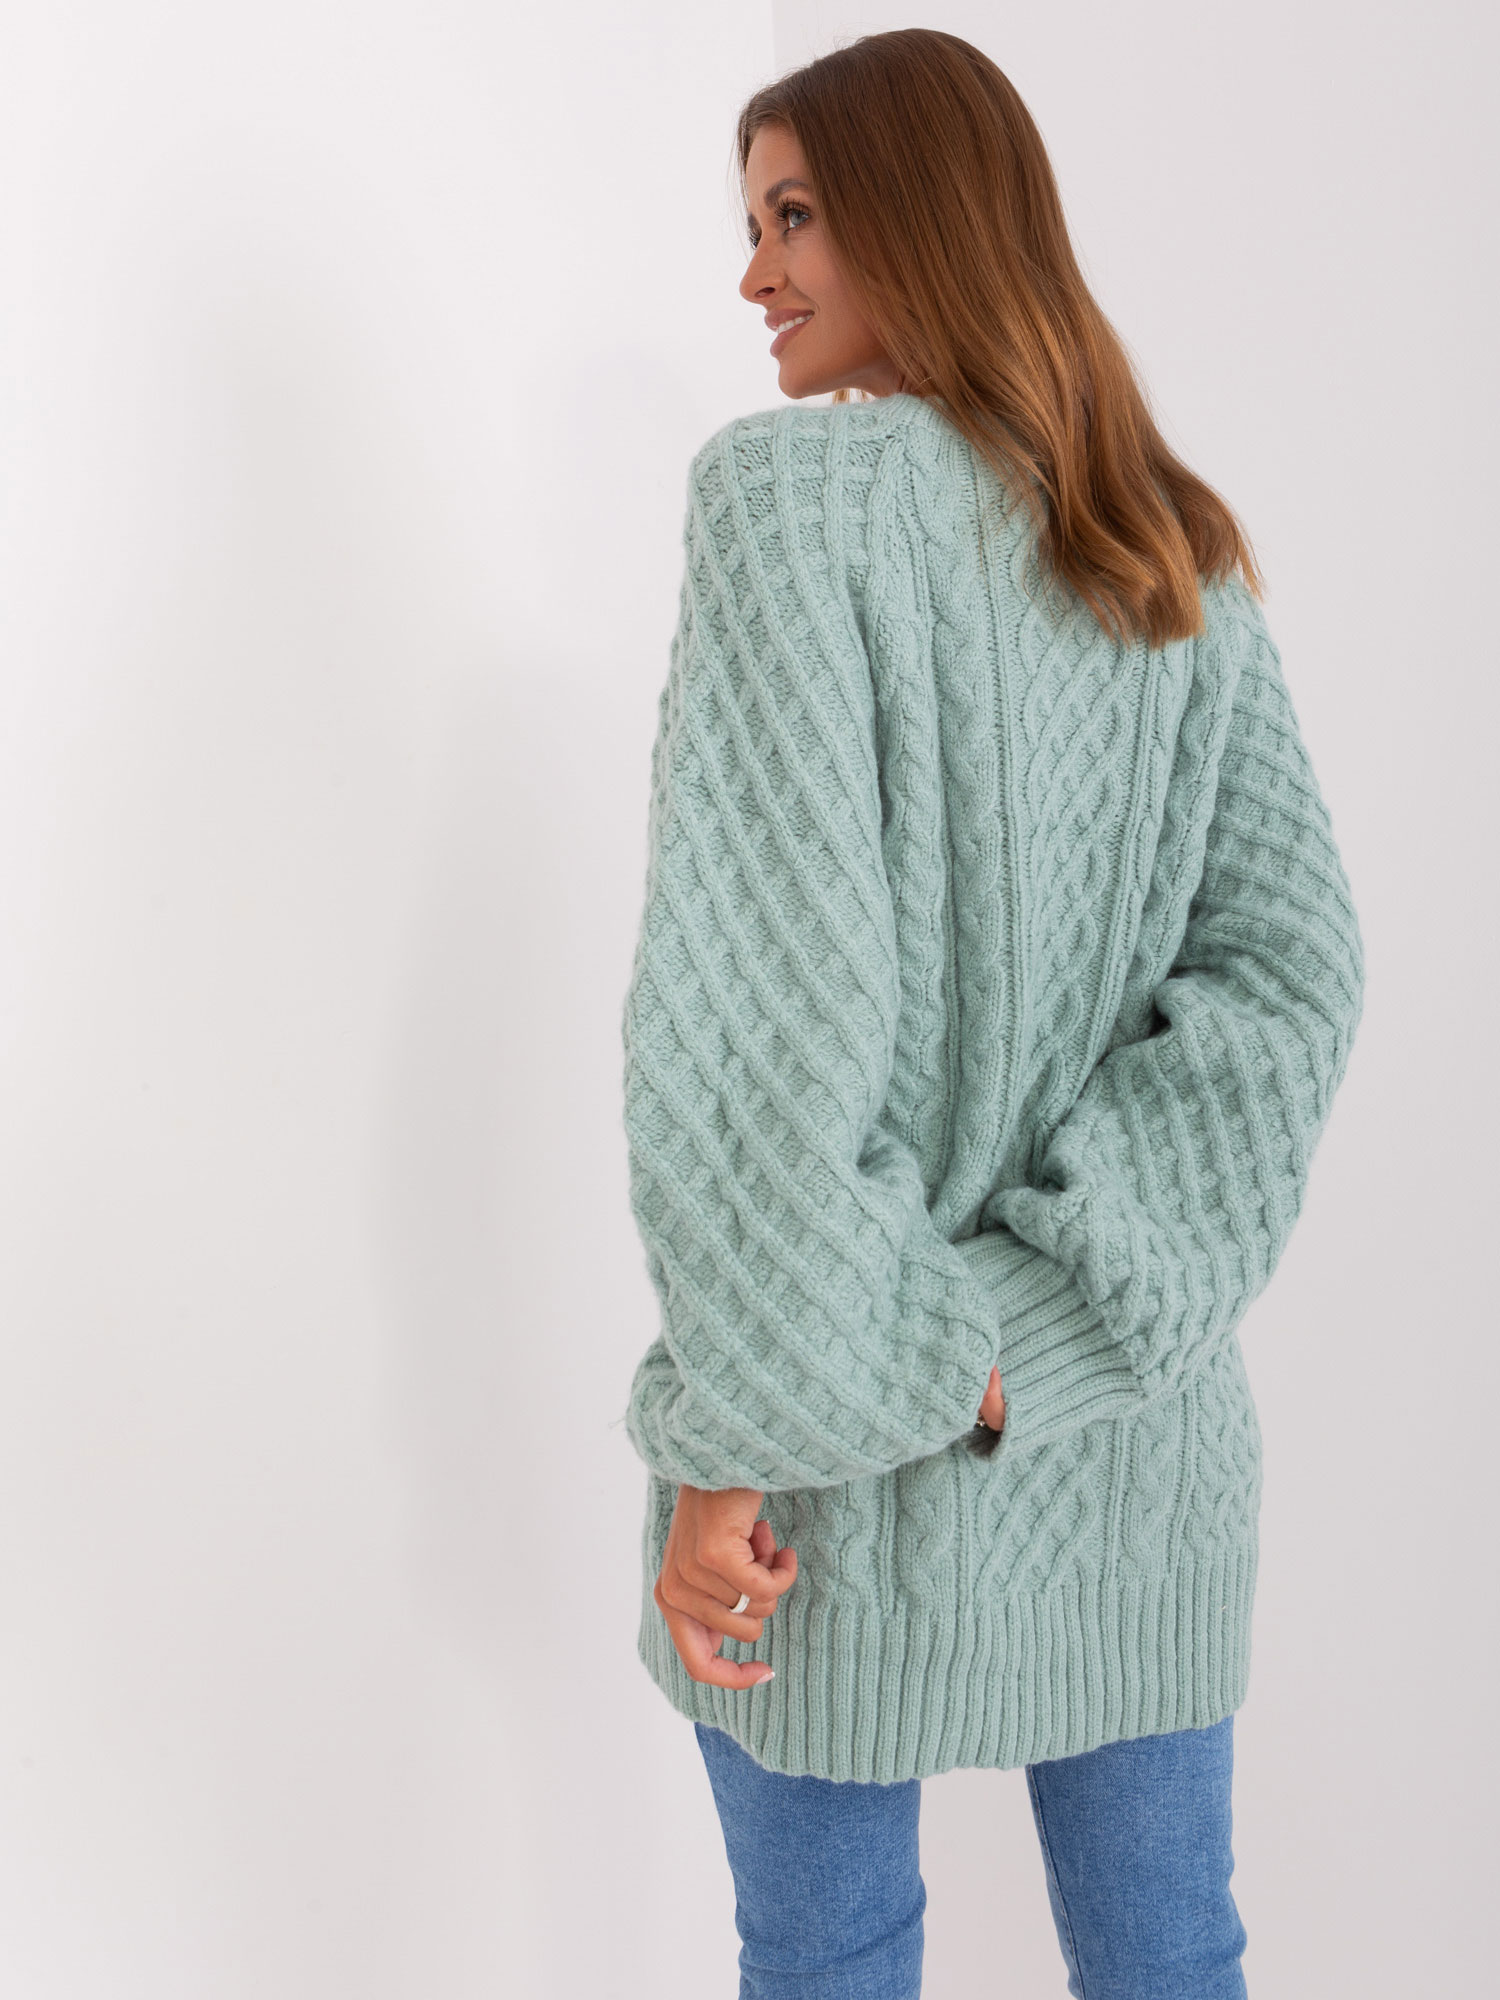 Mint knitted dress with wide sleeves